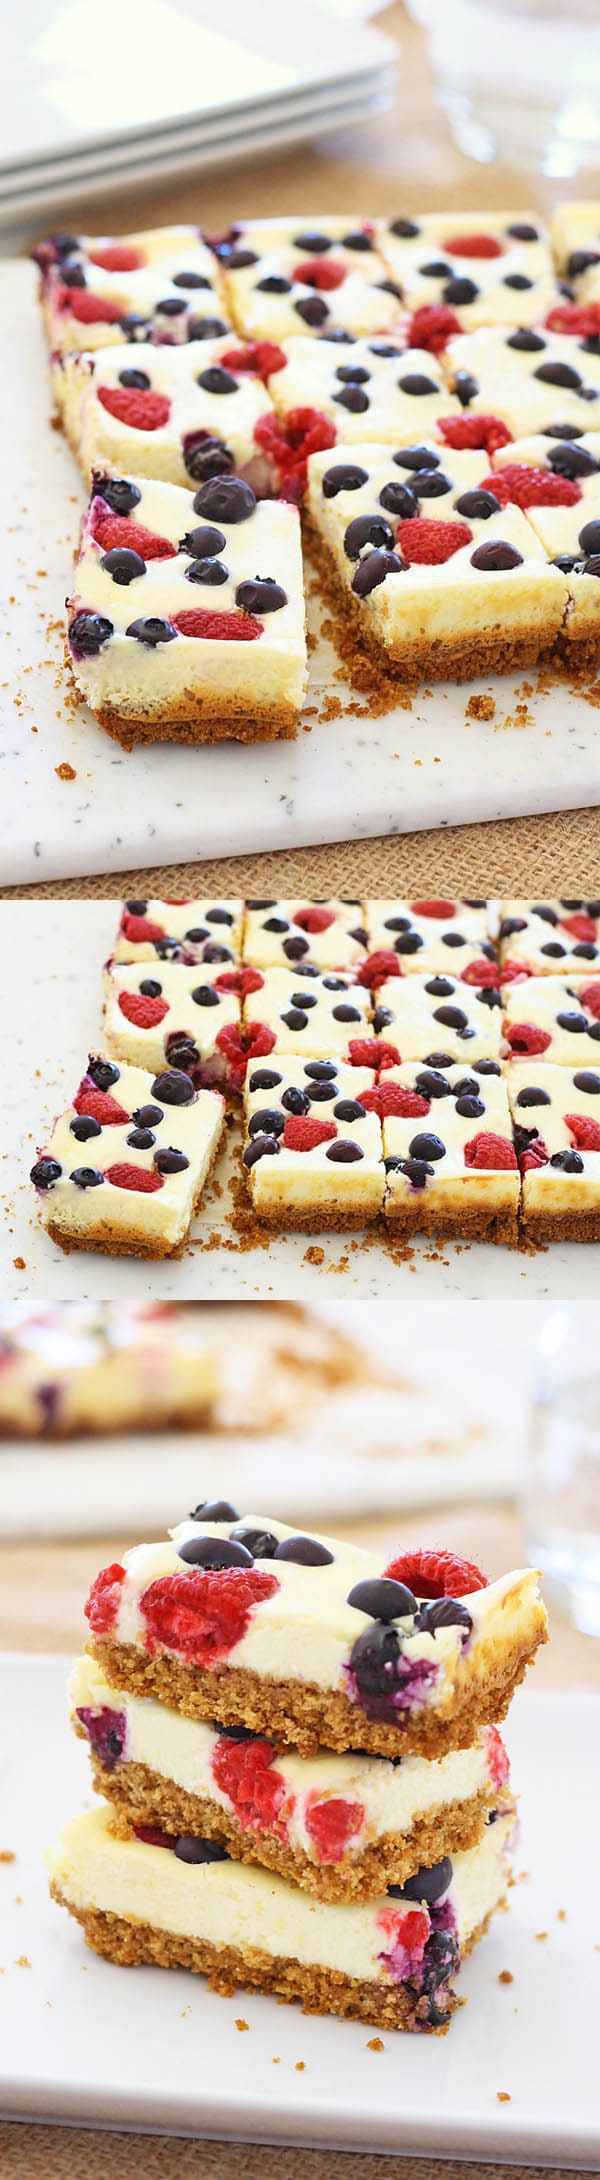 Berry Cheesecake Bars - a sweet and delicious dessert topped with fresh berries. Perfect for the summertime and comes together easily! | rasamalaysia.com